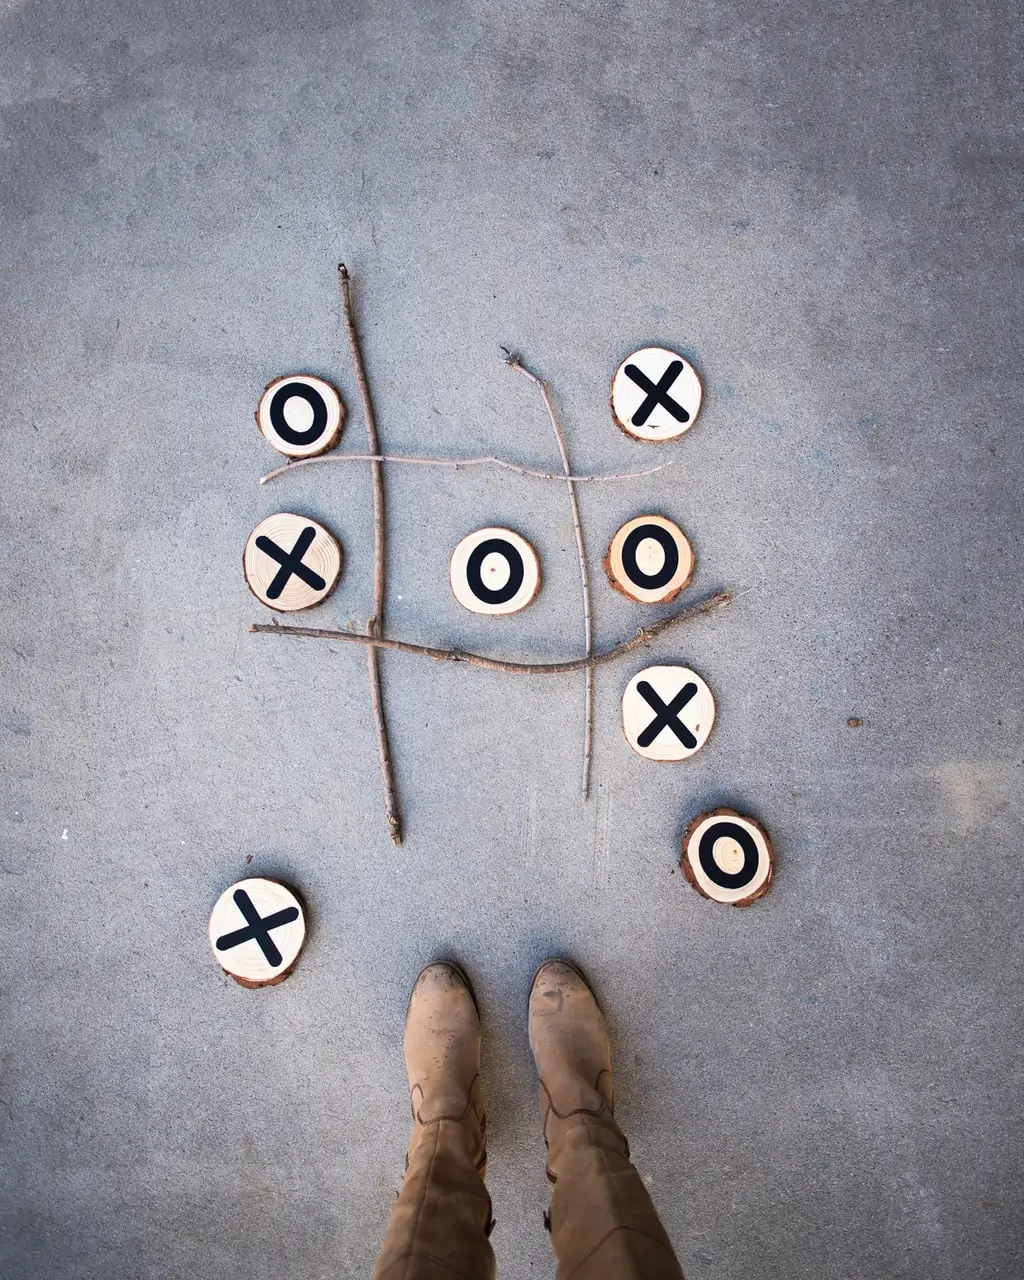 Outdoor tic tac toe game